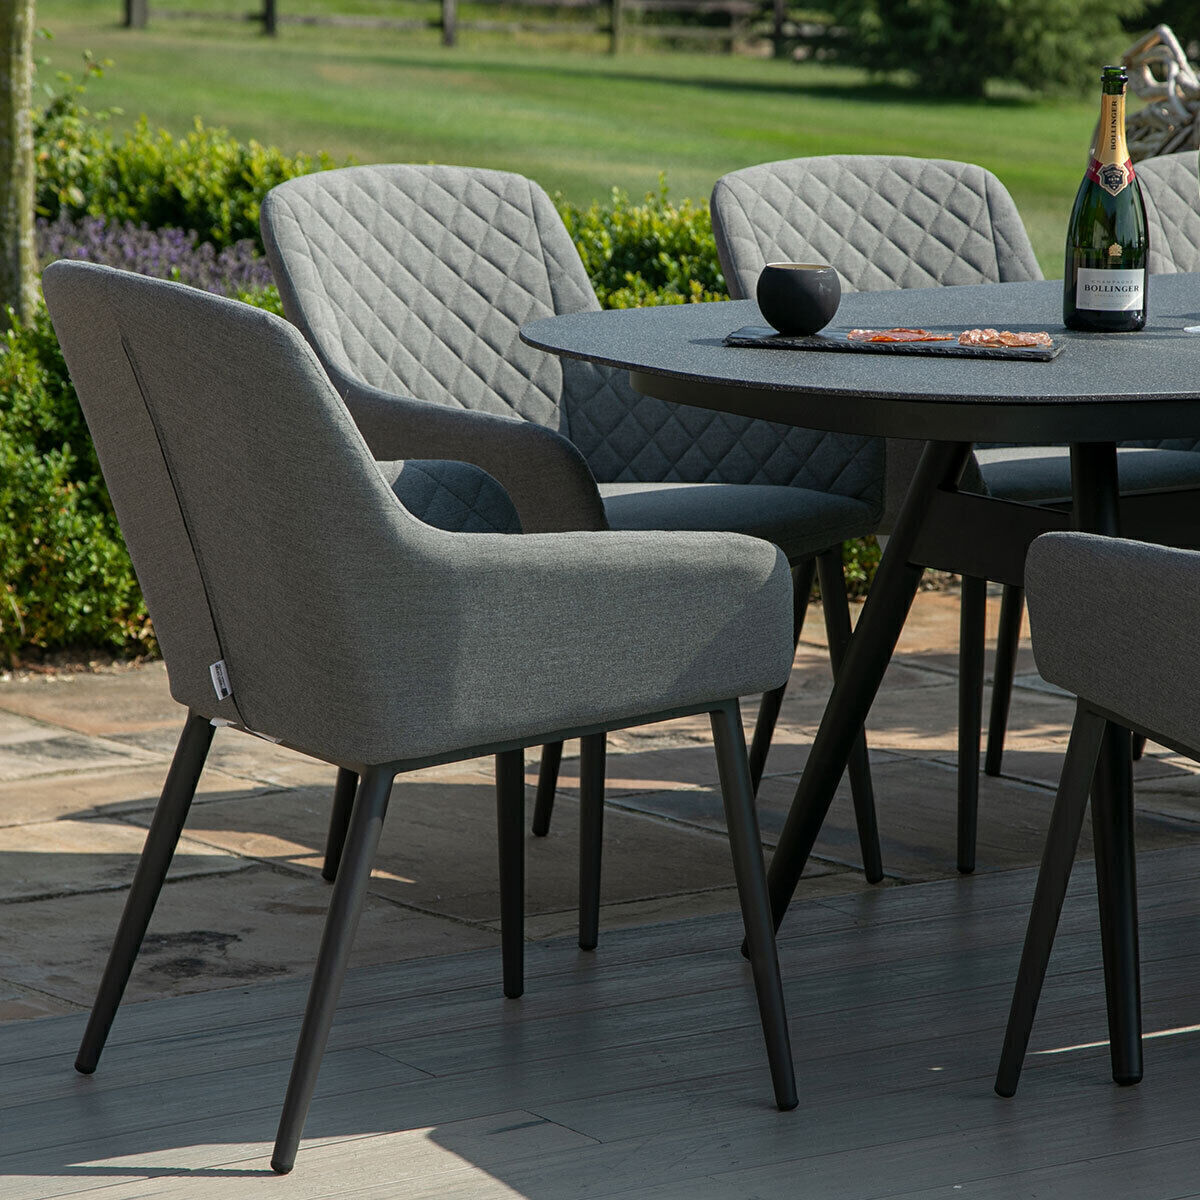 Maze - Outdoor Fabric Zest 8 Seat Oval Dining Set - Flanelle product image